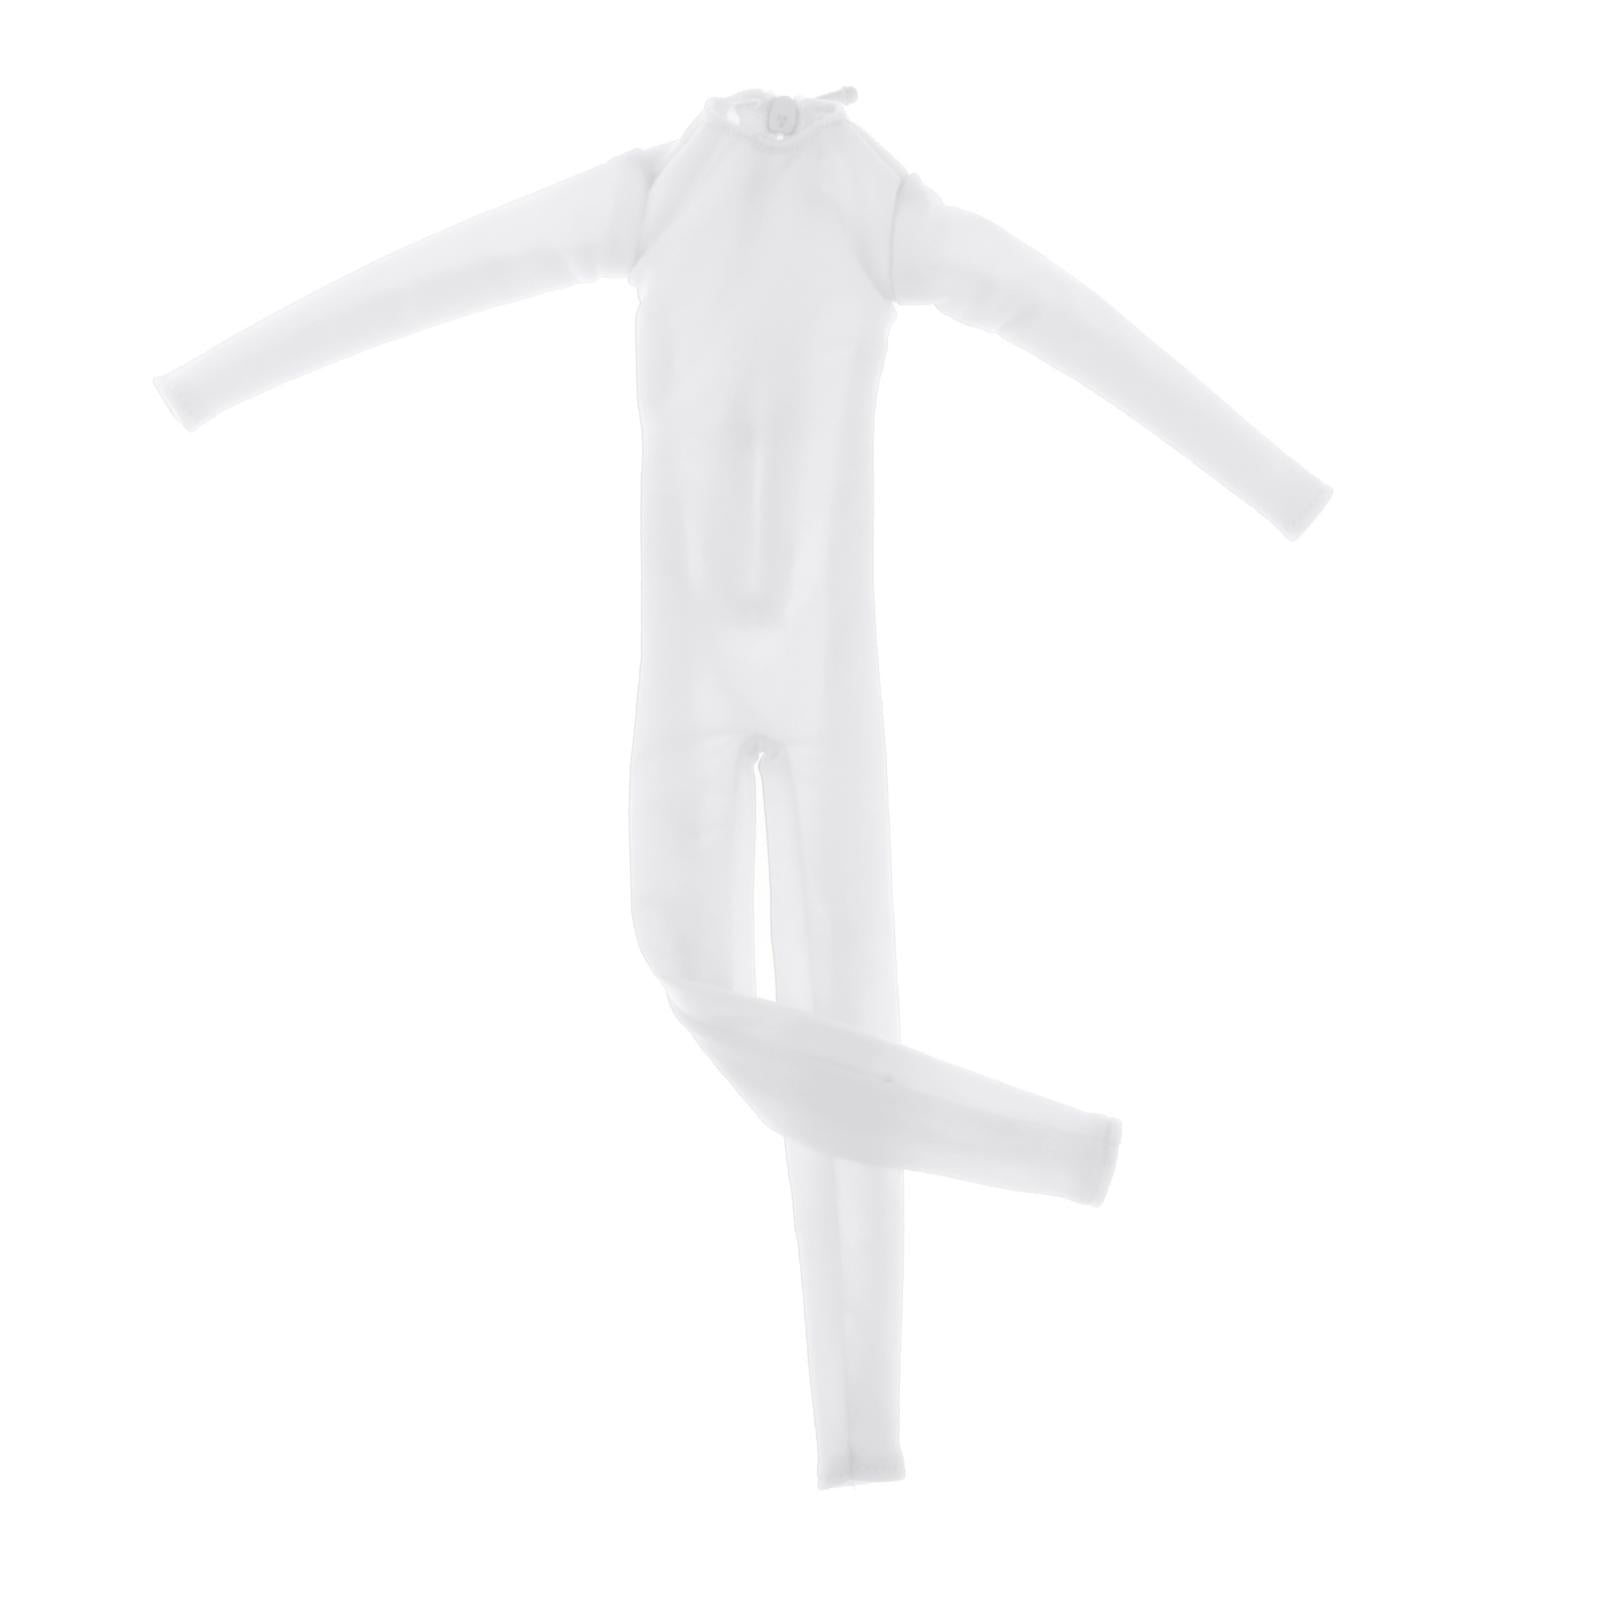 1/6 Long Sleeve Tight Fitting Clothes for 12" DID Figures Accs Cloth White